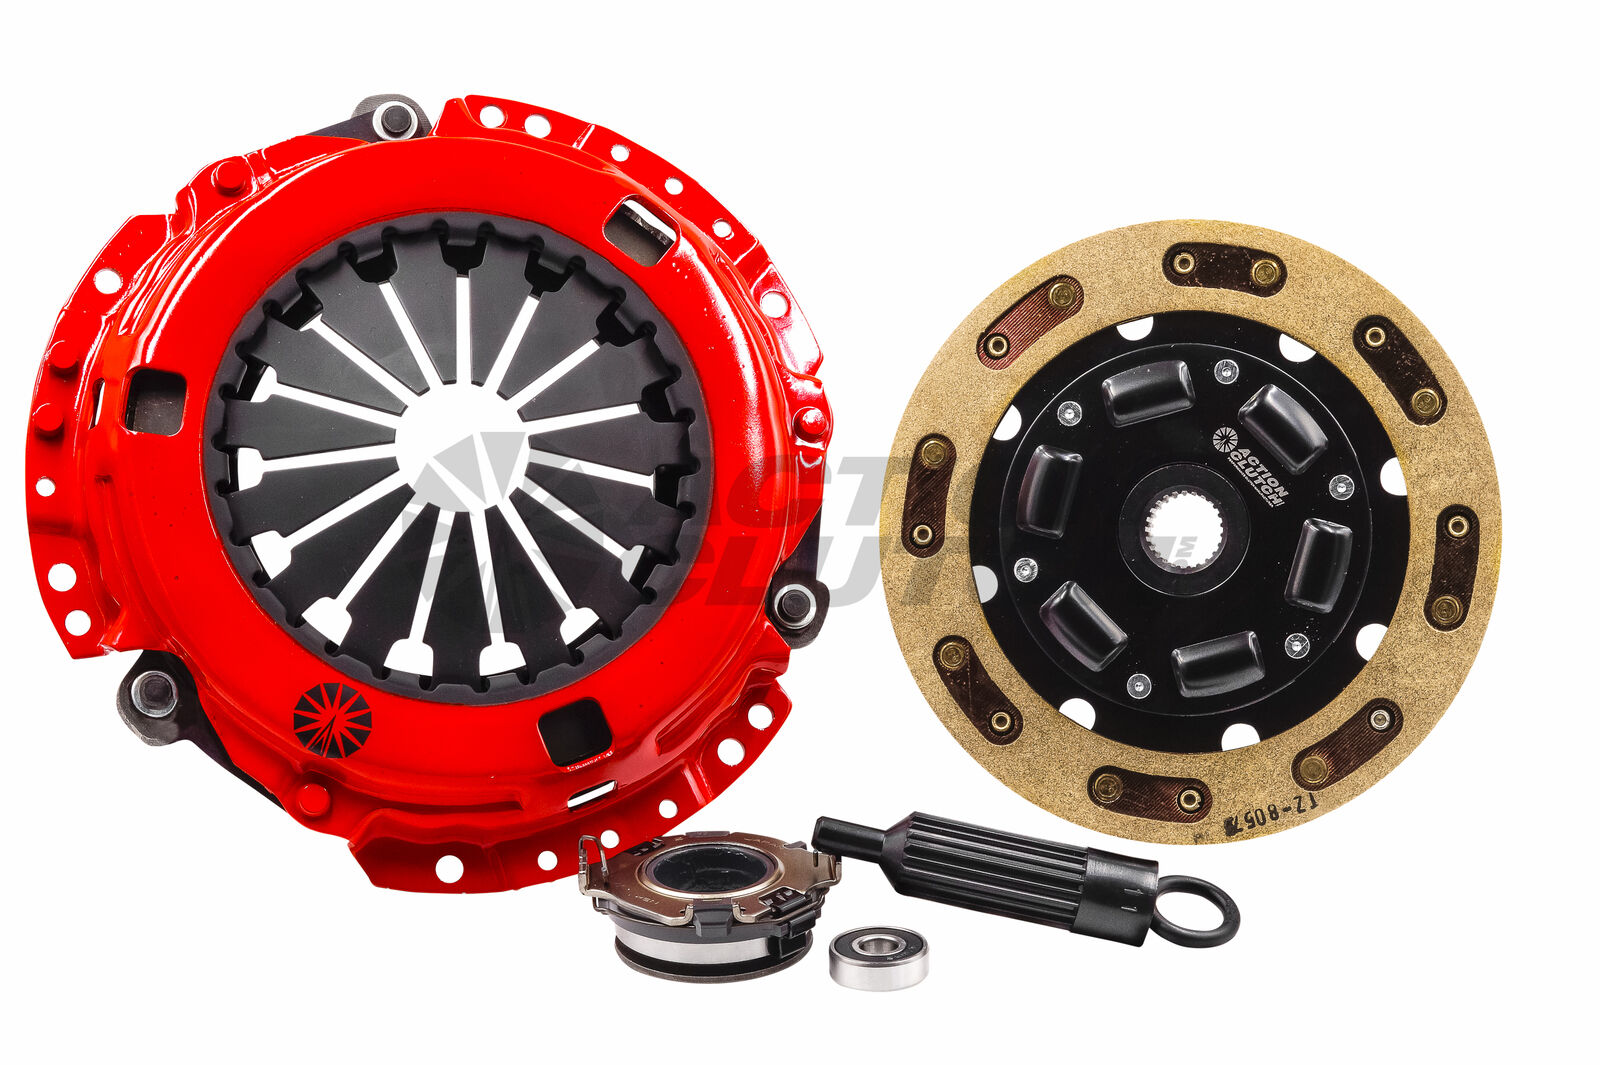 AC STAGE 2 DAILY DRIVER CLUTCH KIT FOR 94-97 HONDA CIVIC DEL SOL Si DOHC 1.6L